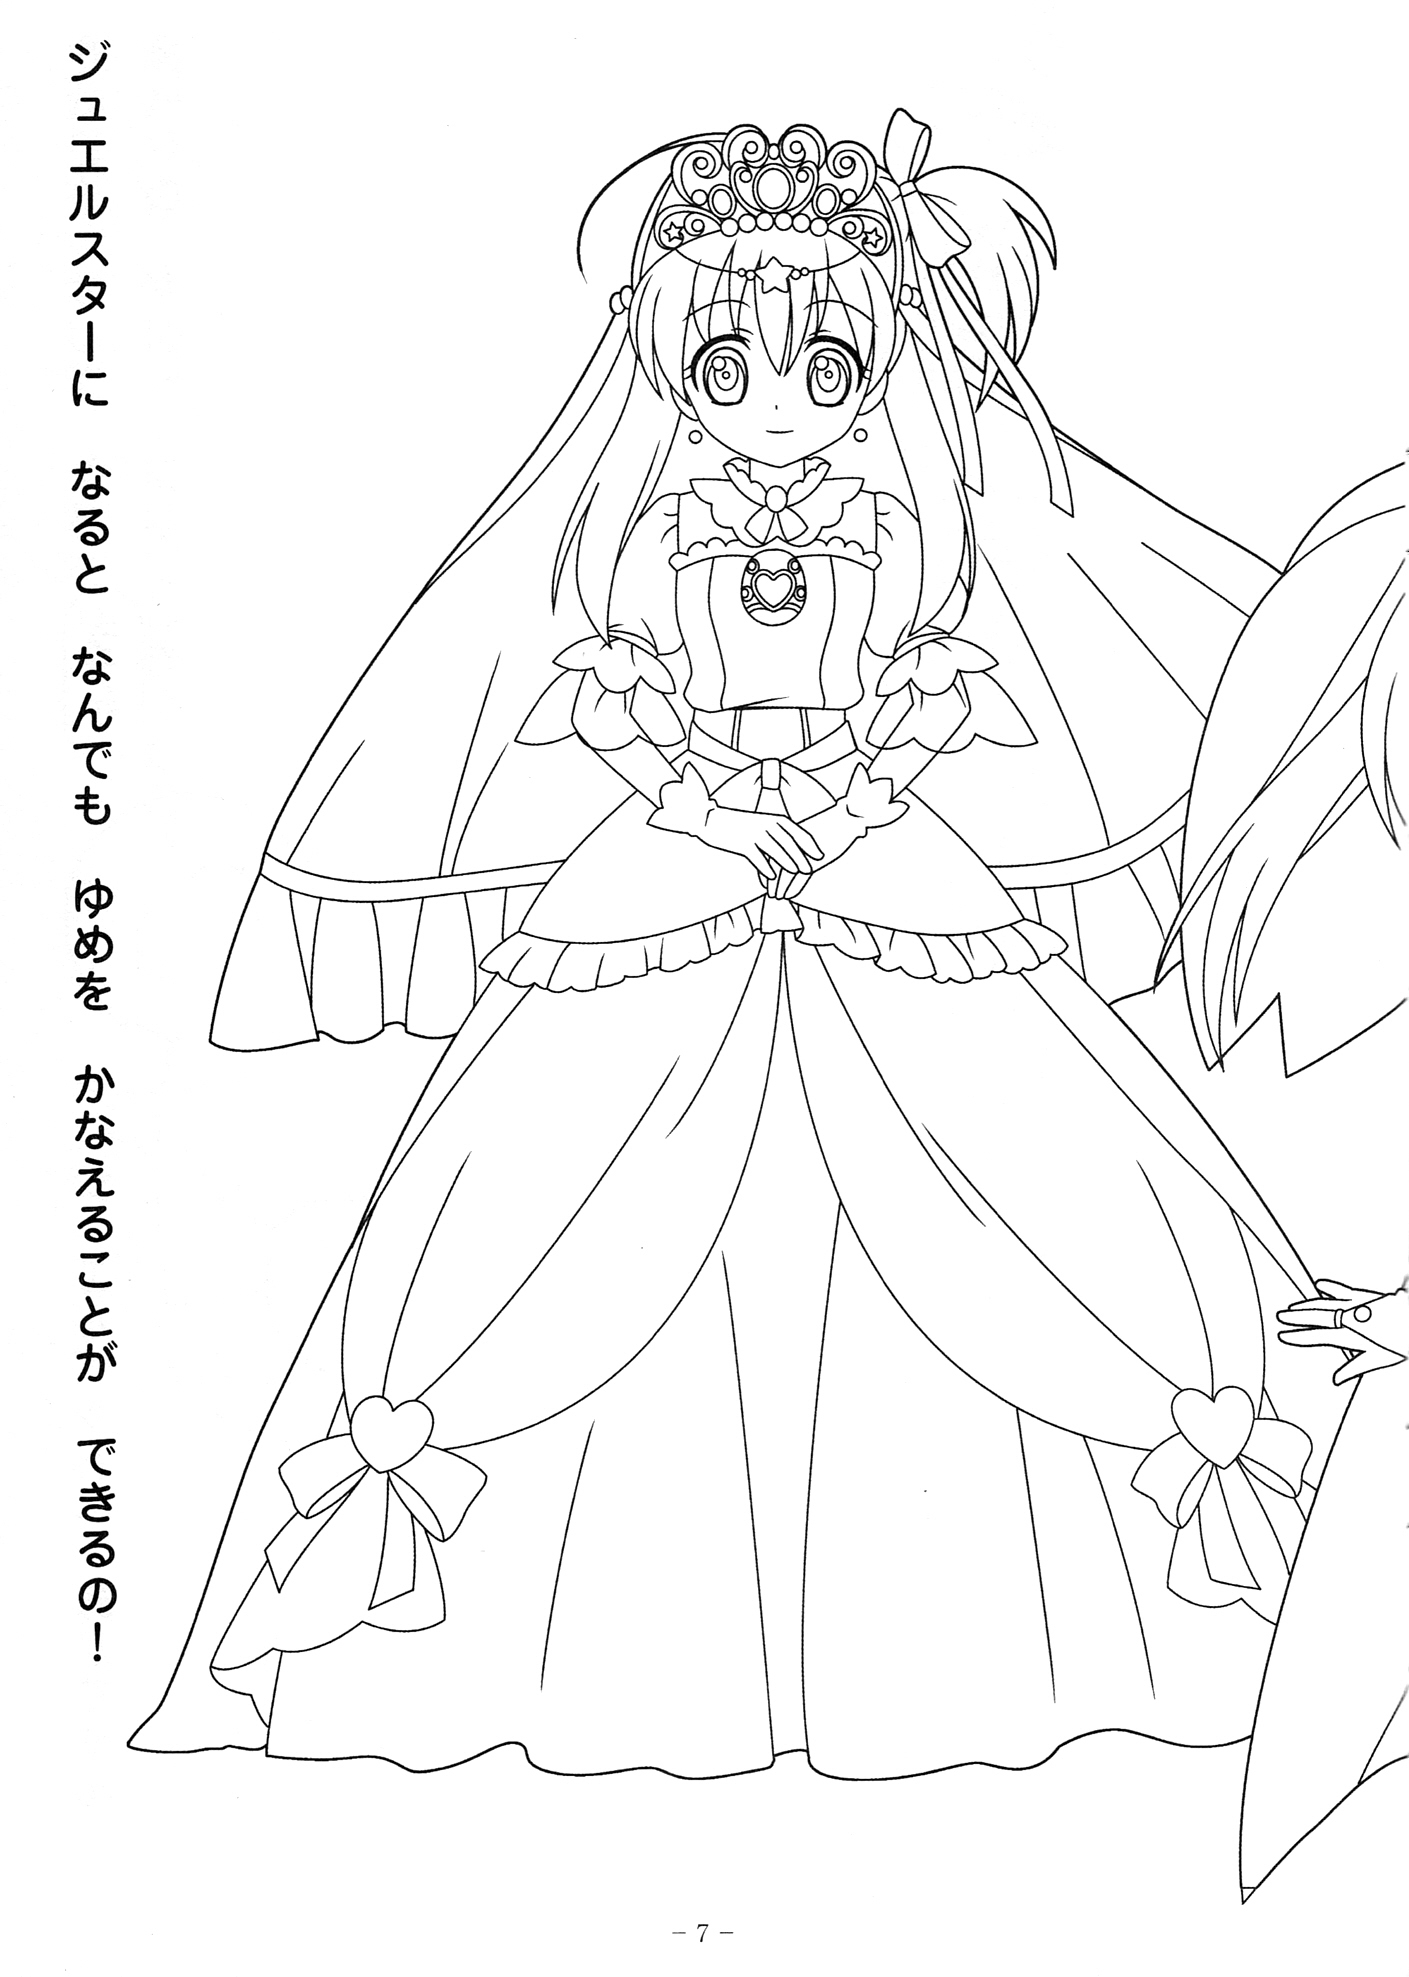 Drawing Jewelpet #37707 (Cartoons) – Printable coloring pages